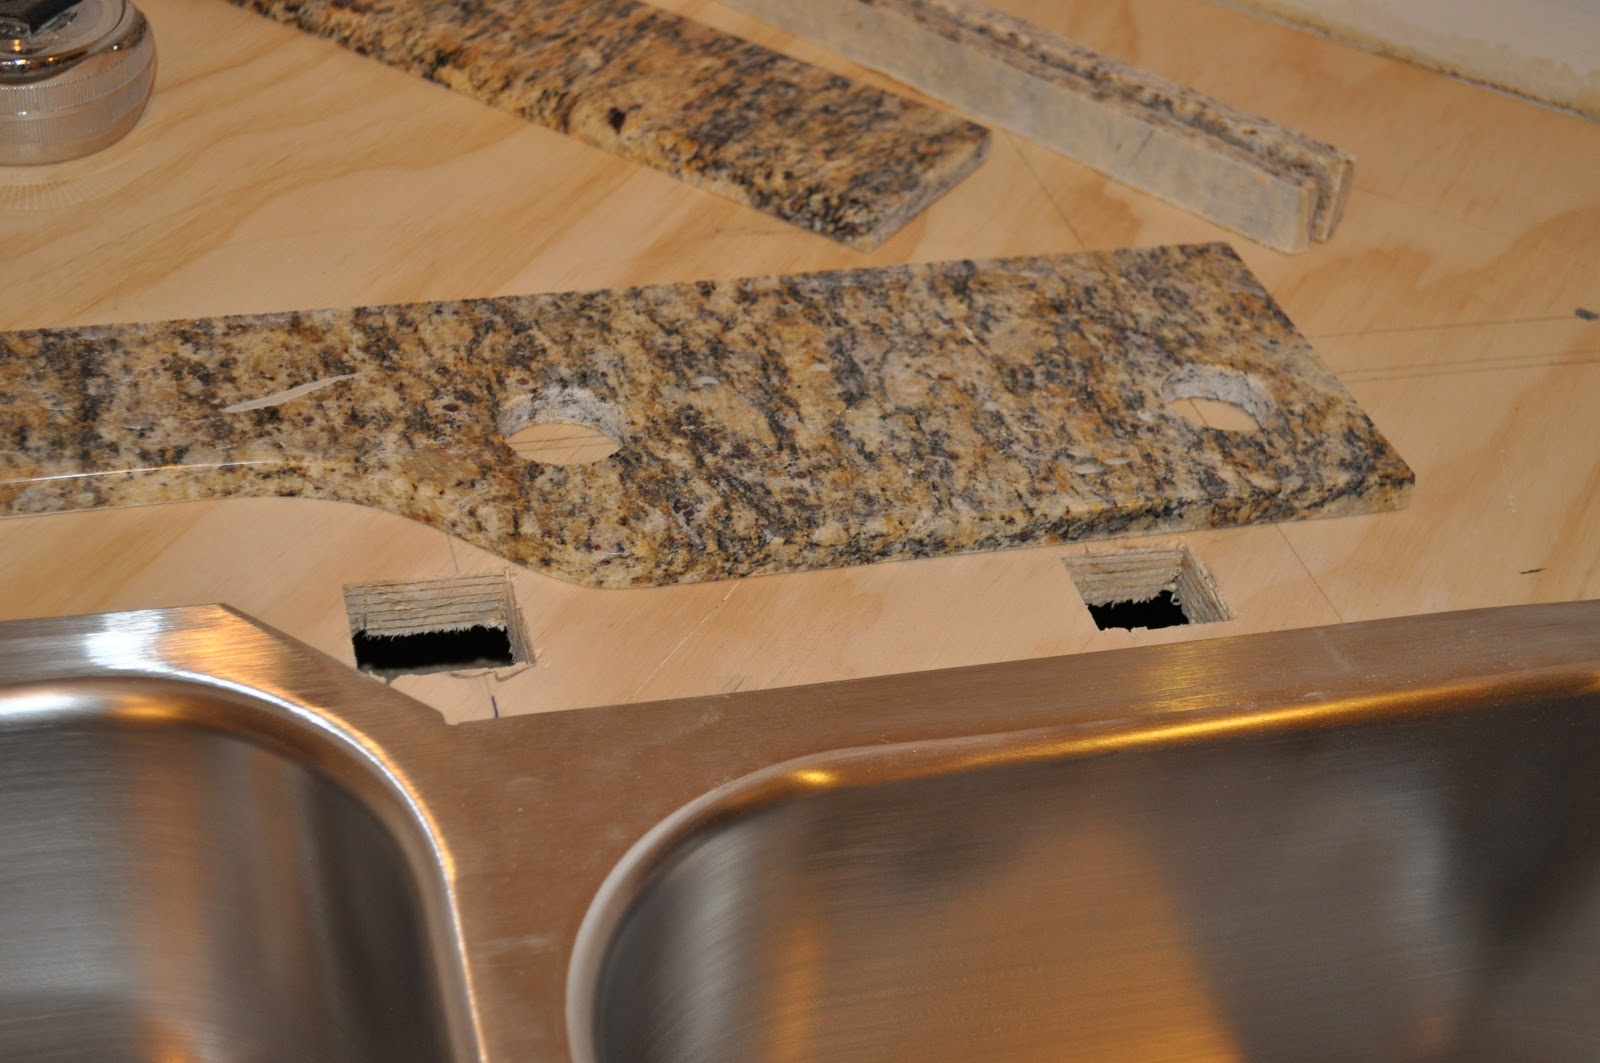 How well does SoapstoneSlate do as countertop? - Home Forums